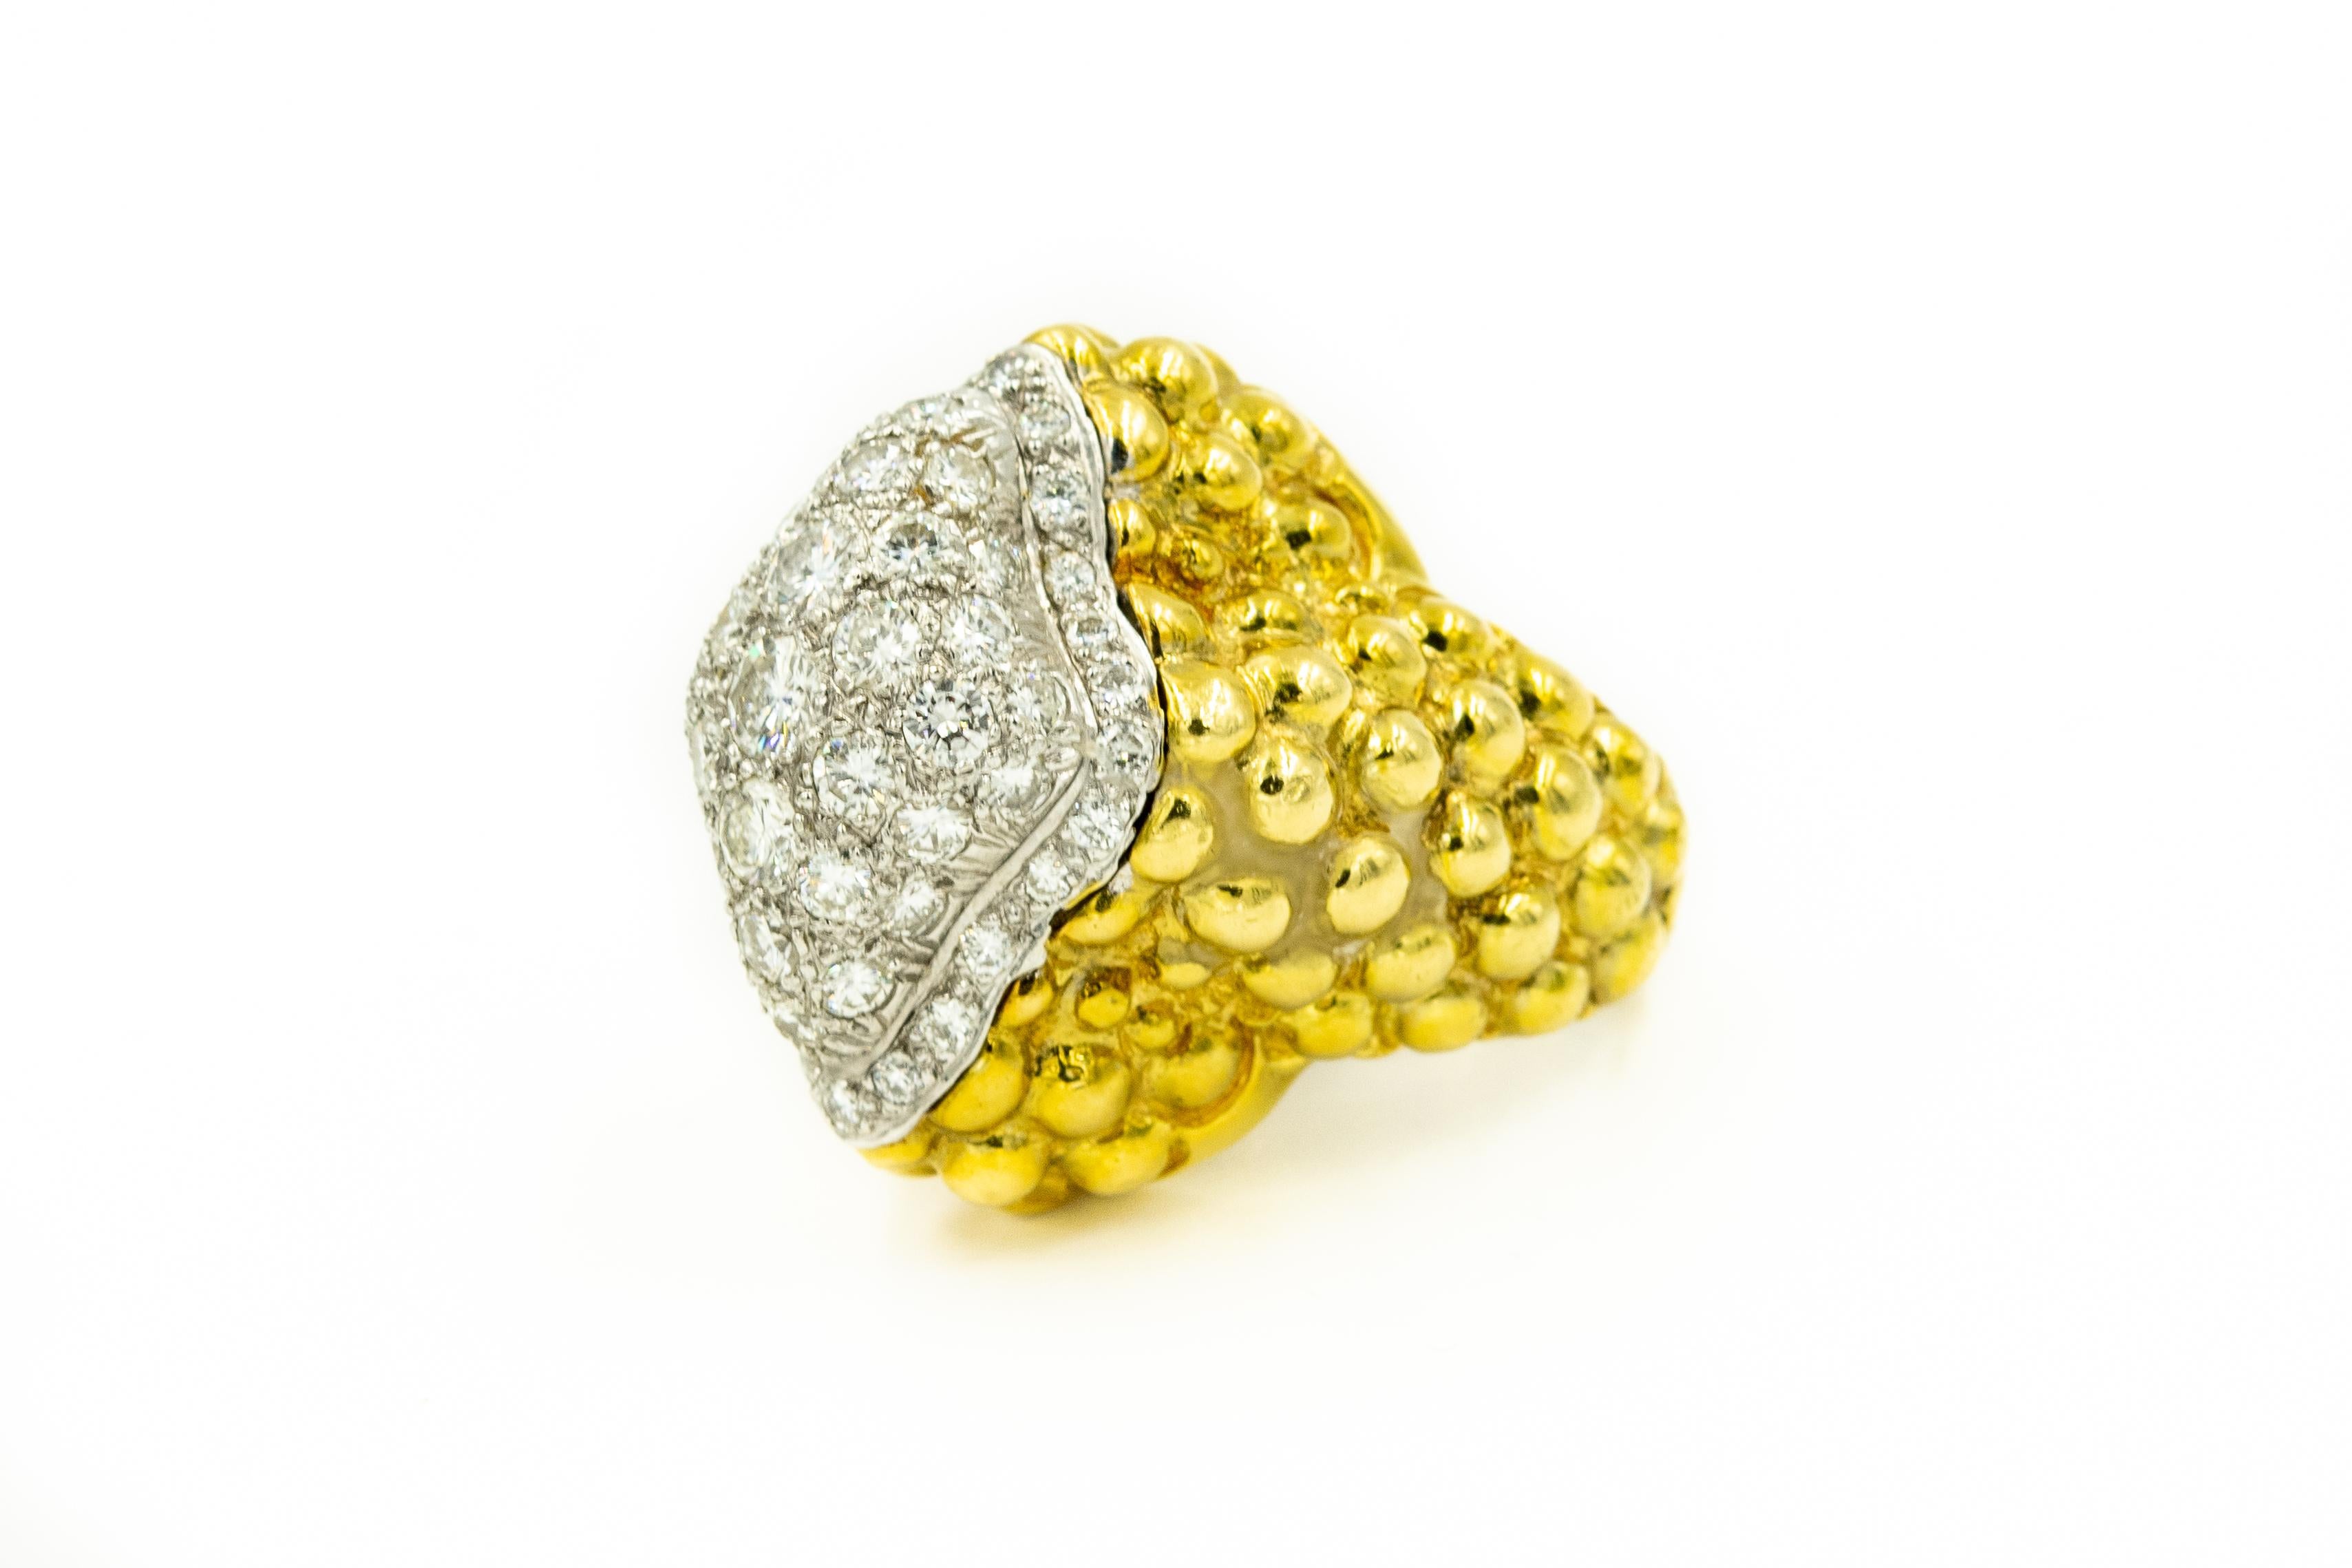 Impressive 1970s David Webb style cocktail ring  featuring a marquis shaped raised pave diamond center on a highly stylized beaded, pebbled or bubble designed 14k yellow gold band. The ring contains approximately 4.02 carats of diamonds.

US size